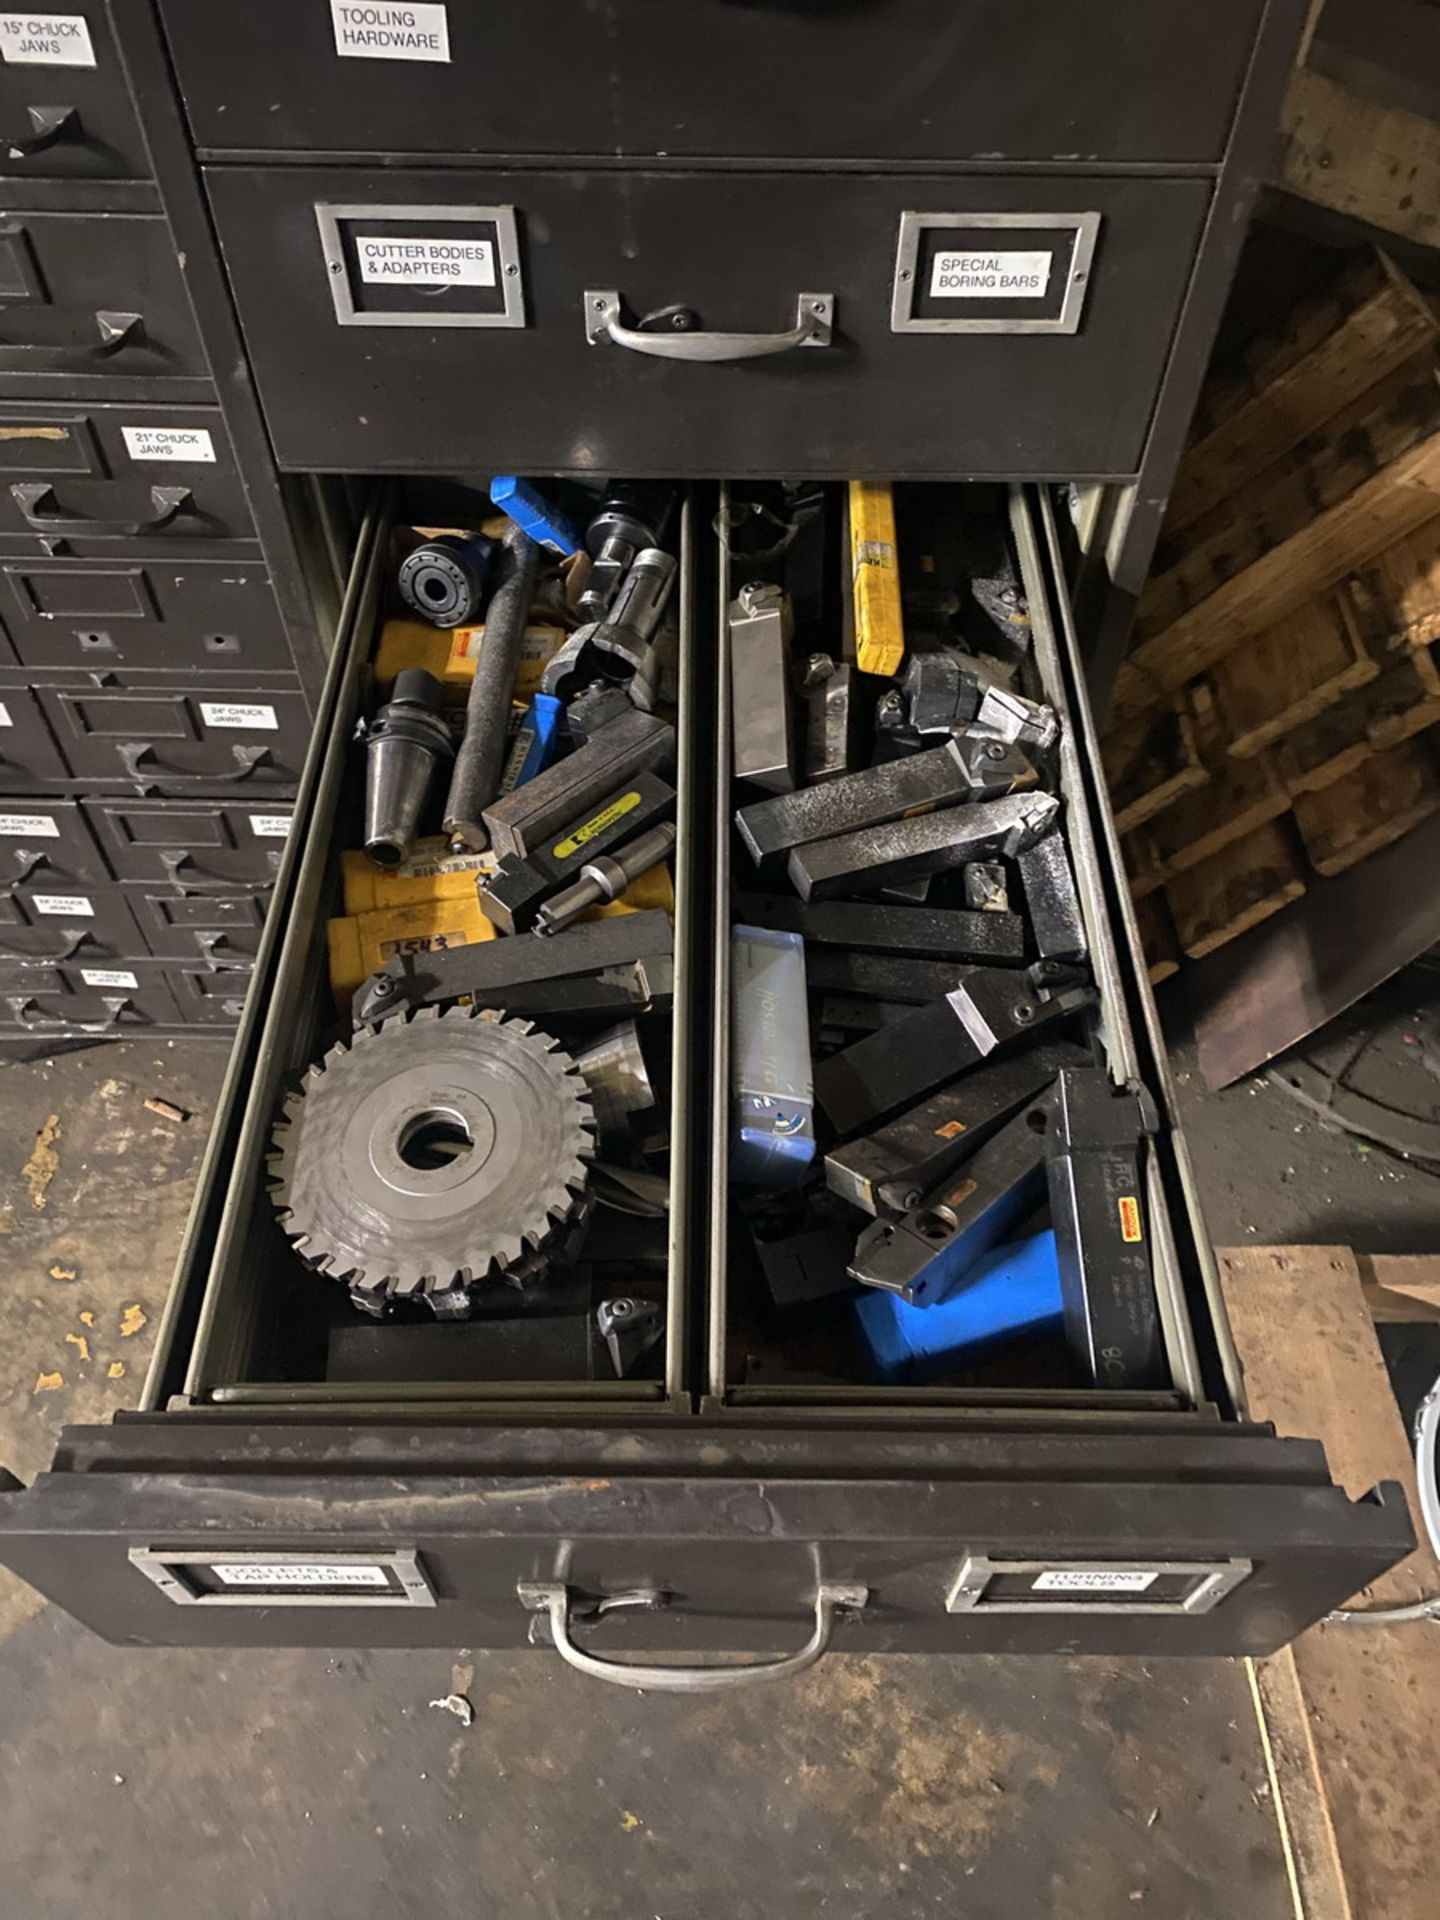 8-Drawer Heavy Duty Cabinet 30'' x 23'' x 62'' w/ contents of Drills, Collet Chucks, Carbide - Image 5 of 8